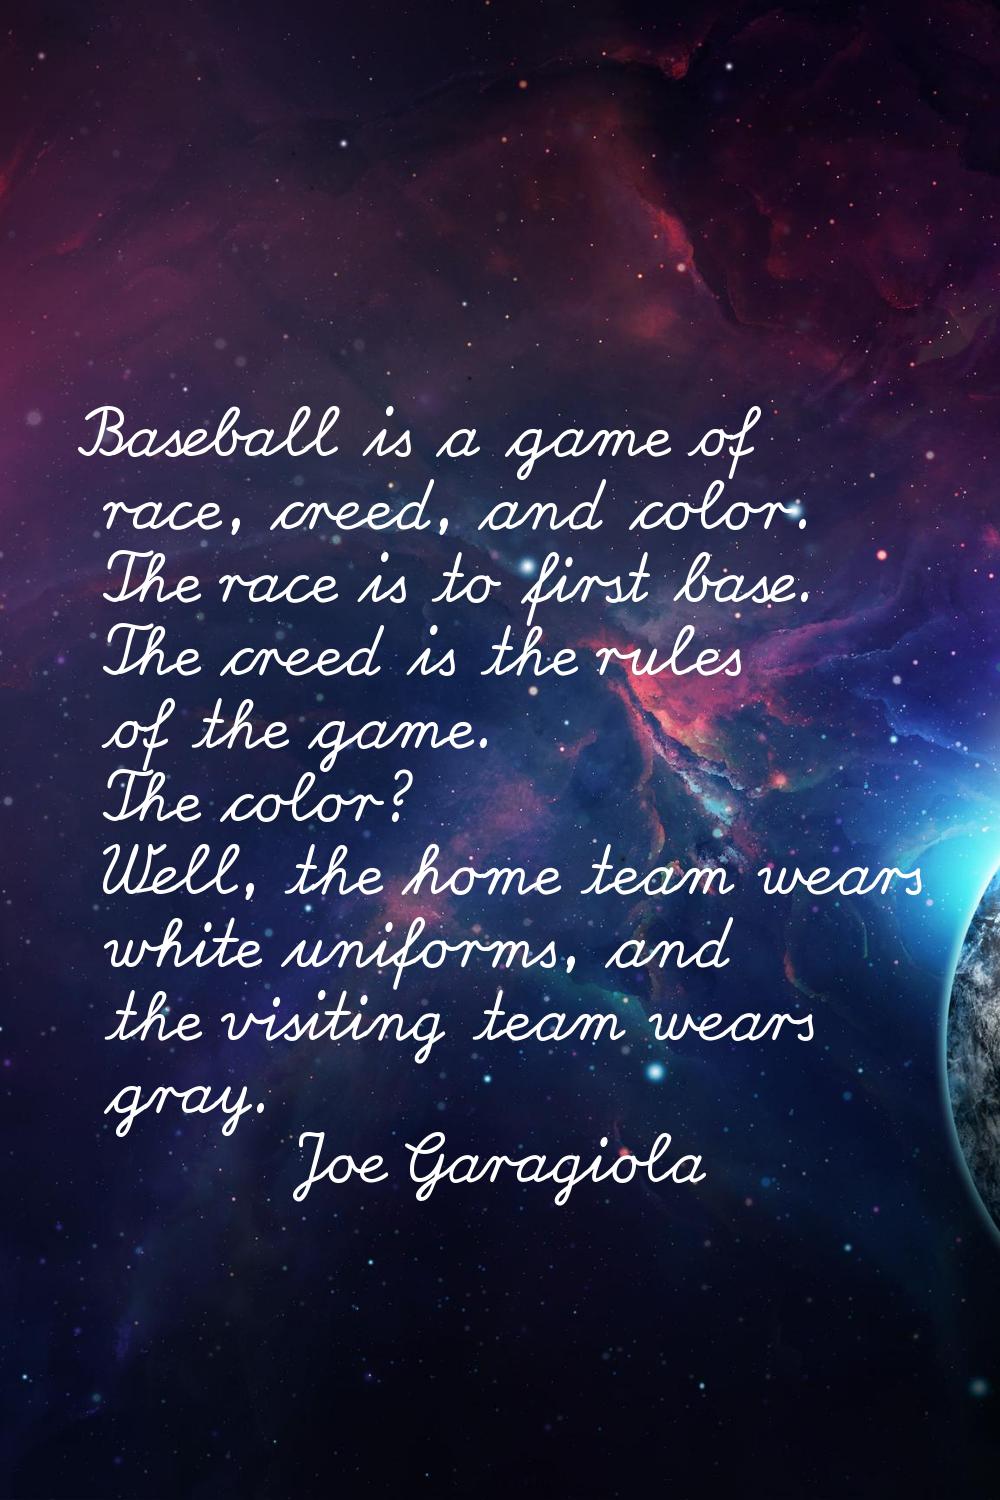 Baseball is a game of race, creed, and color. The race is to first base. The creed is the rules of 